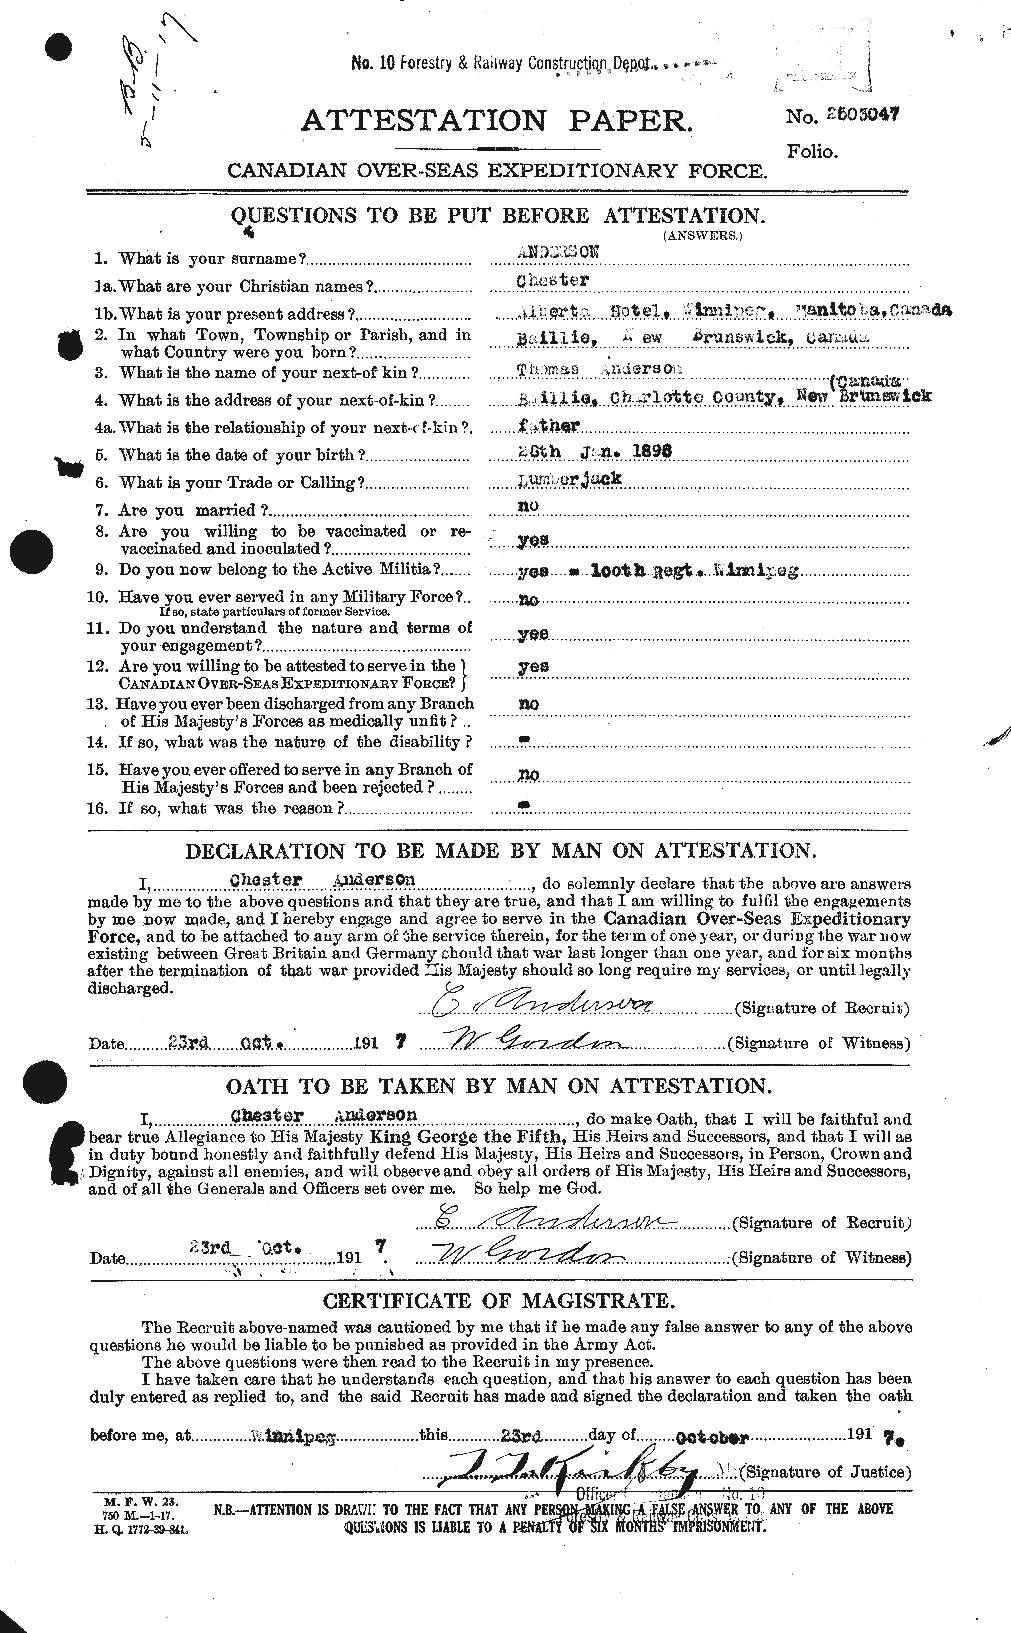 Personnel Records of the First World War - CEF 209214a